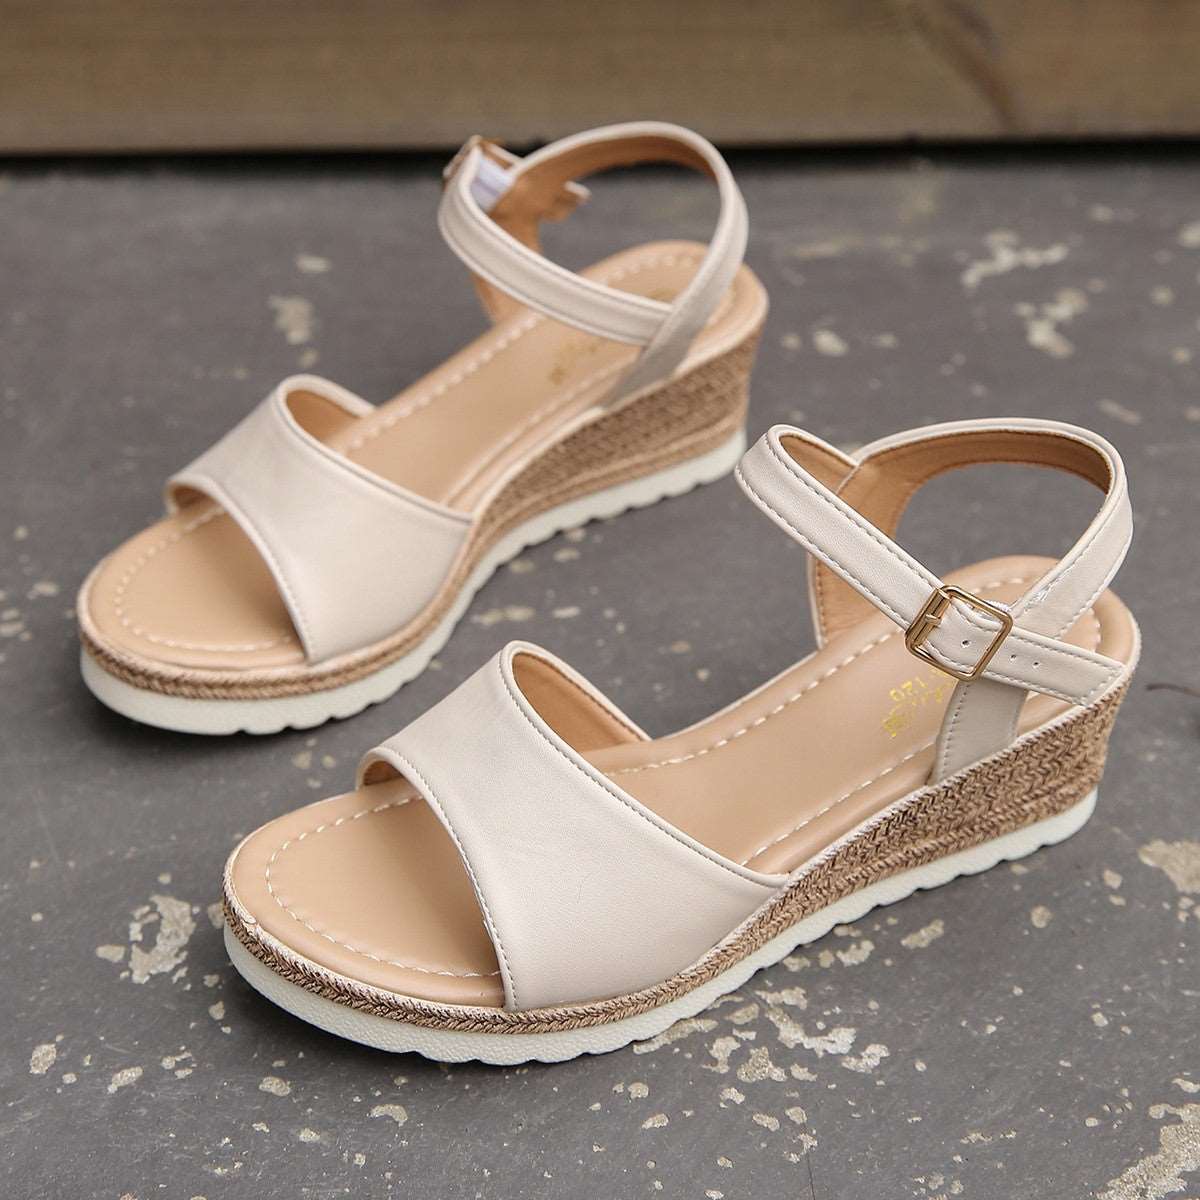 Ankle Buckle Wedges Sandals For Women Summer Platform Shoes Shoes & Bags